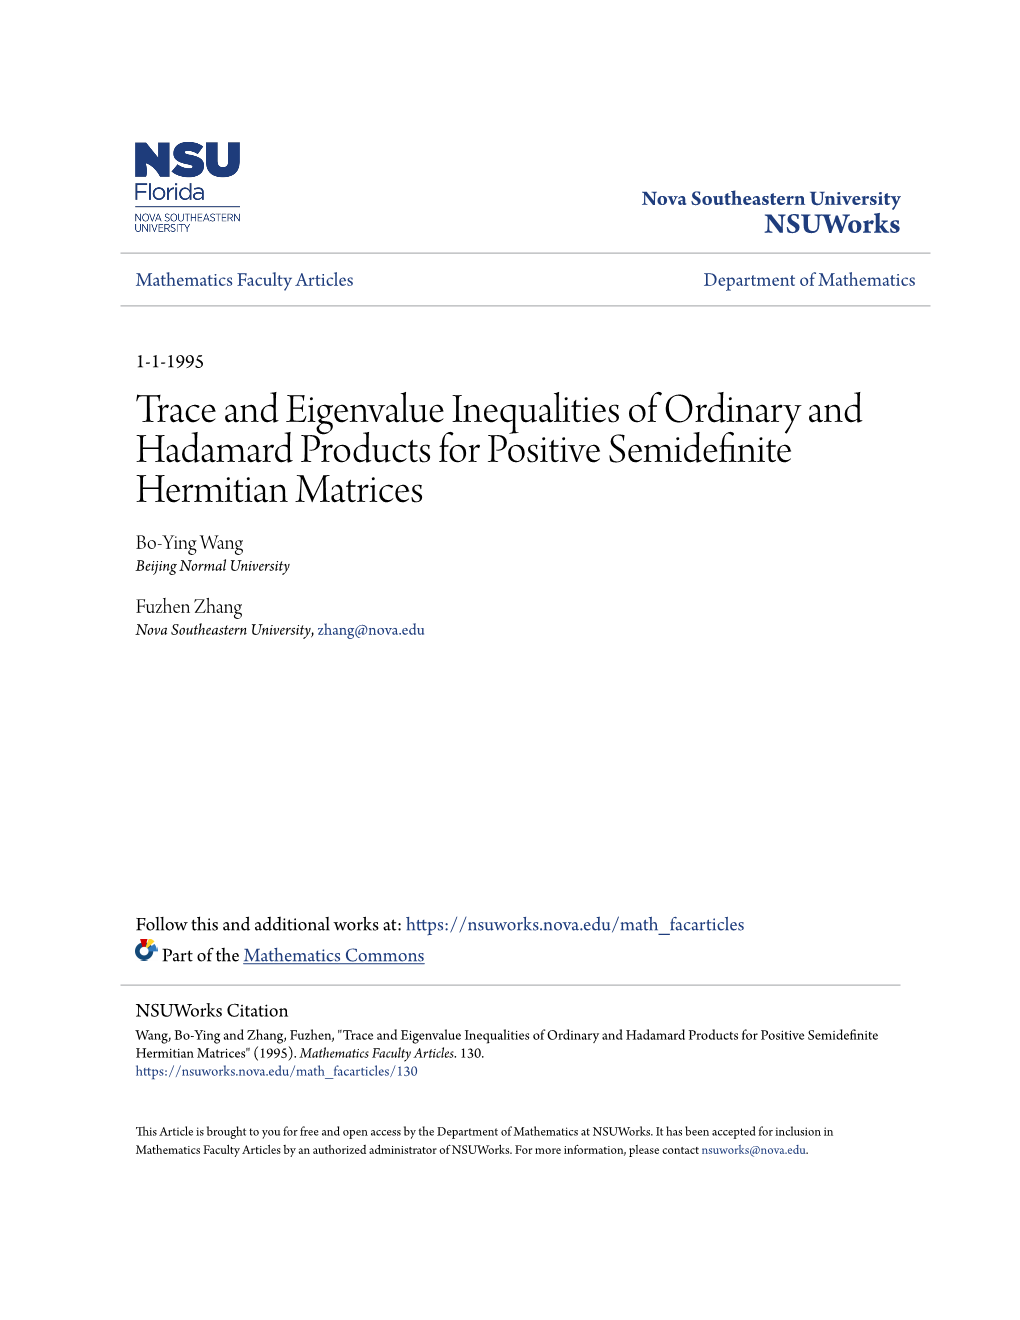 Trace and Eigenvalue Inequalities of Ordinary and Hadamard Products for Positive Semidefinite Hermitian Matrices Bo-Ying Wang Beijing Normal University